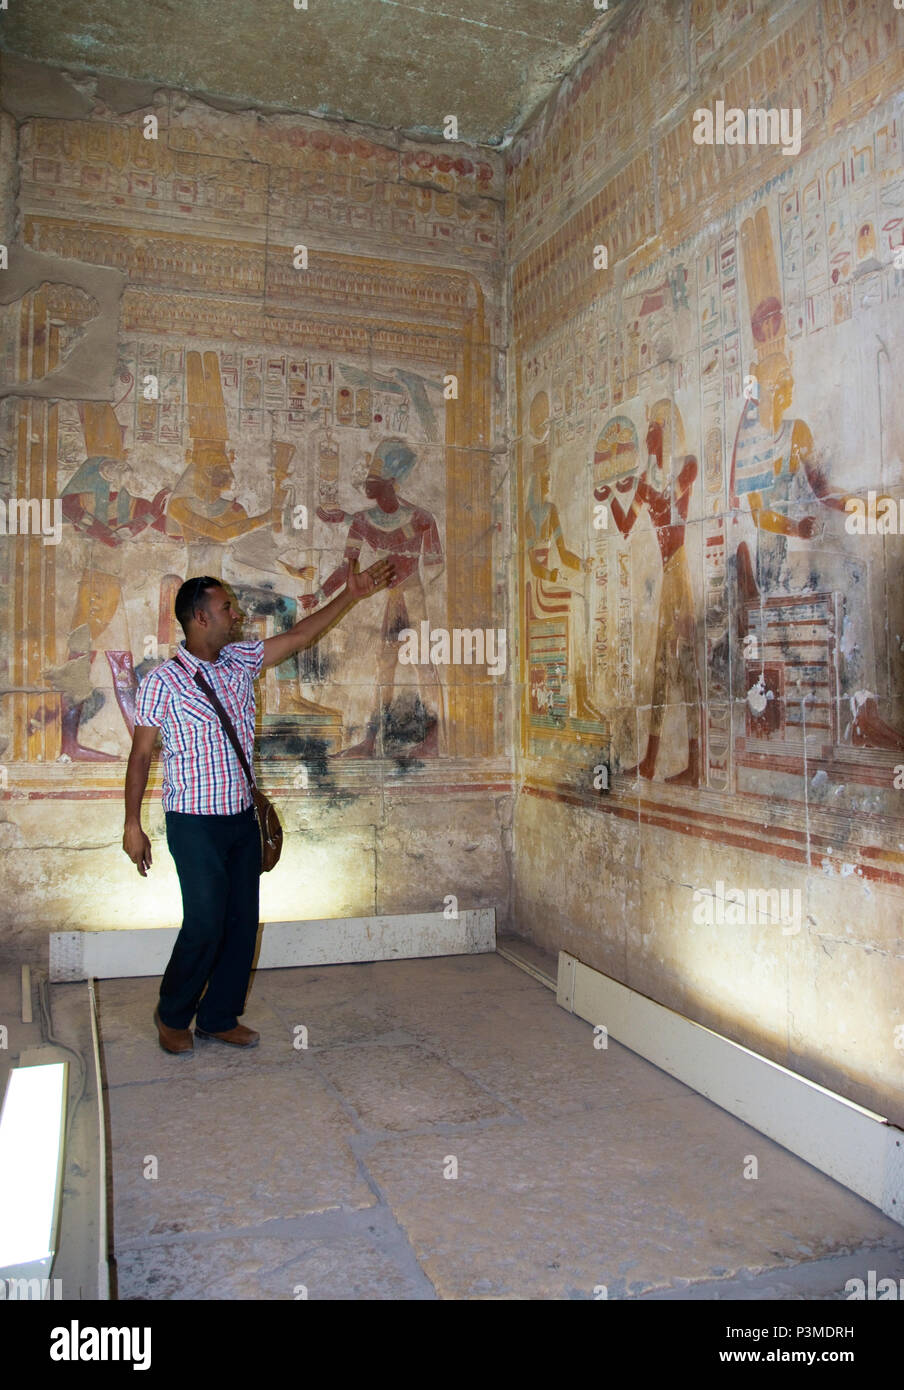 An Egyptian tour guide describes colorful bas relief stone carvings inside the Great Osiris Temple, Abydos, Egypt. Stock Photo